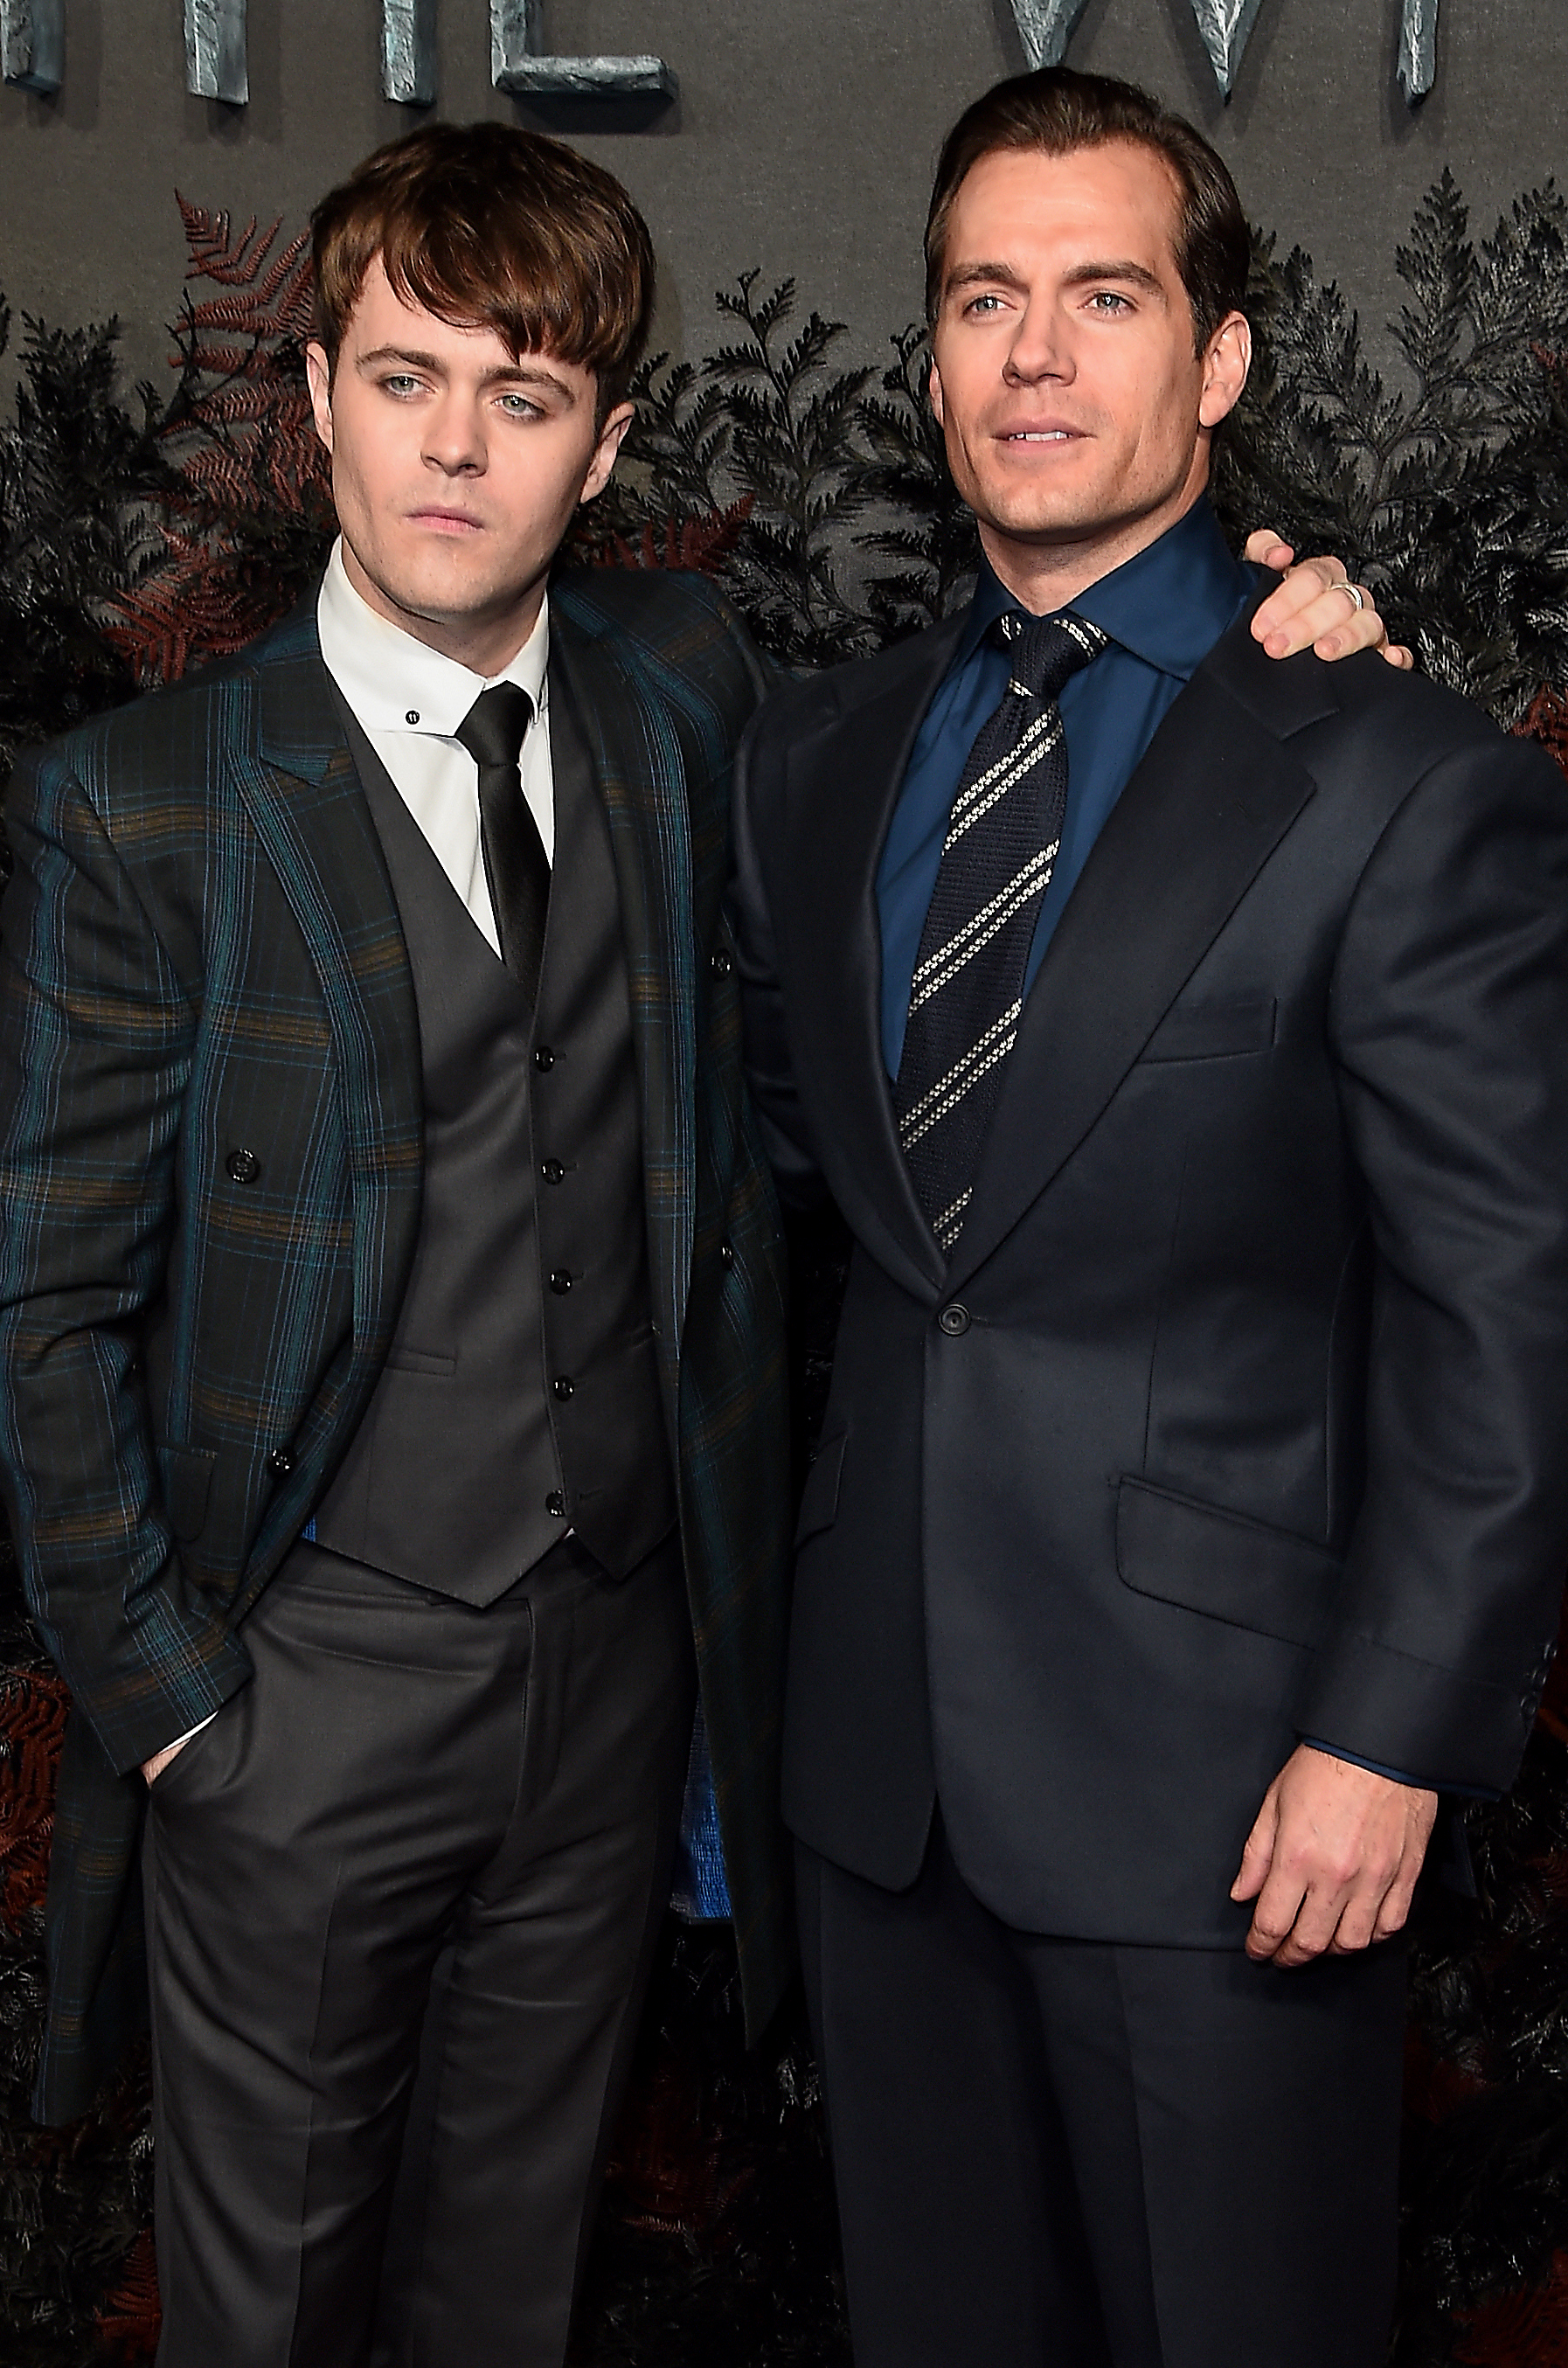 Joey Batey and Henry Cavill at premiere of "The Witcher" on December 16, 2019, in London, England. | Source: Getty Images